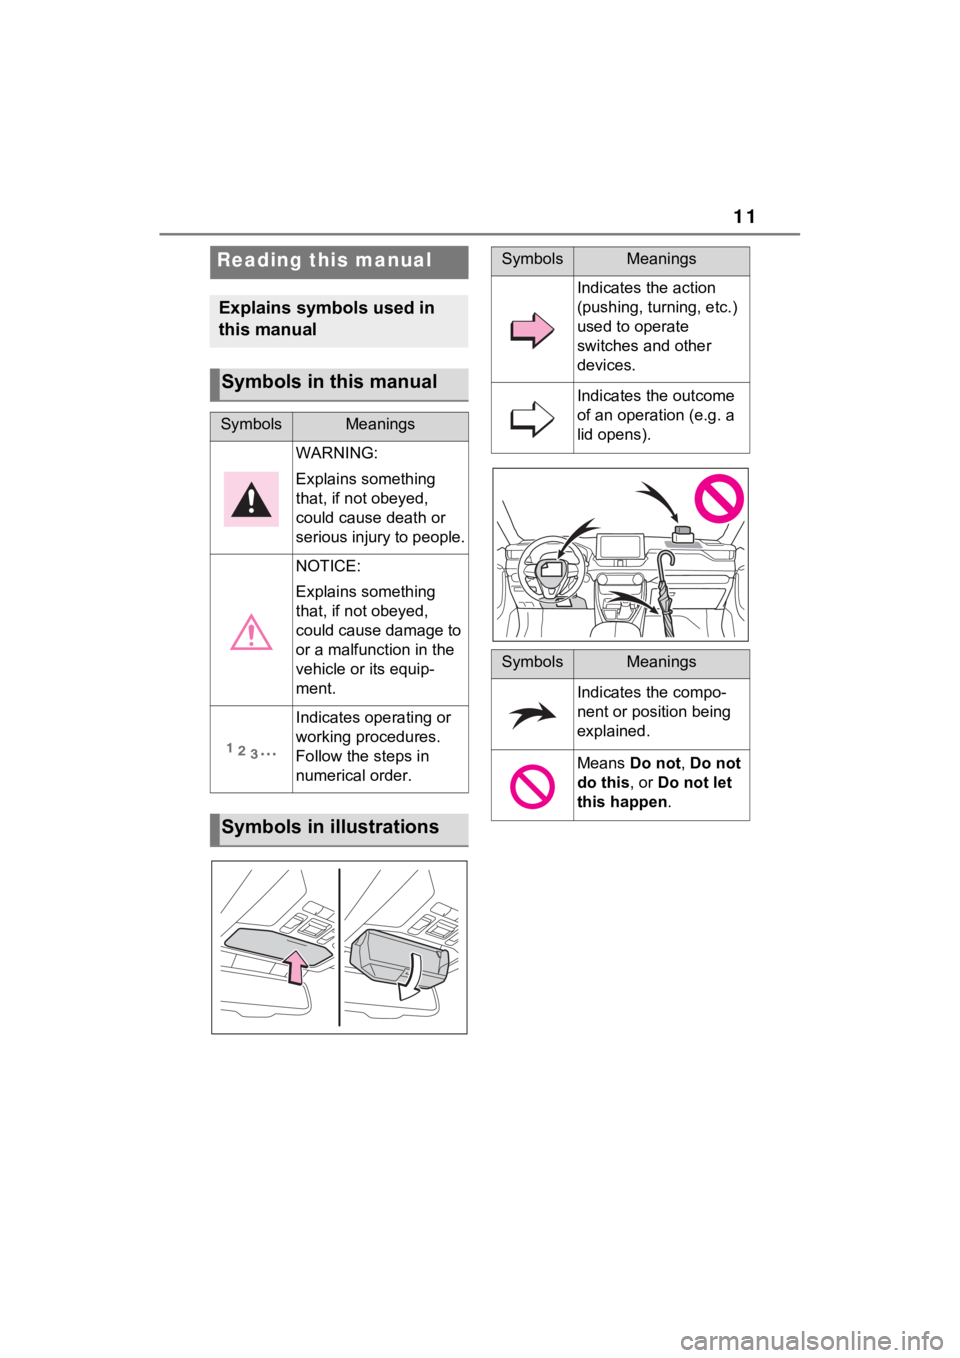 TOYOTA RAV4 PRIME 2021  Owners Manual 11
Reading this manual
Explains symbols used in 
this manual
Symbols in this manual
SymbolsMeanings
WARNING:
Explains something 
that, if not obeyed, 
could cause death or 
serious injury to people.
N